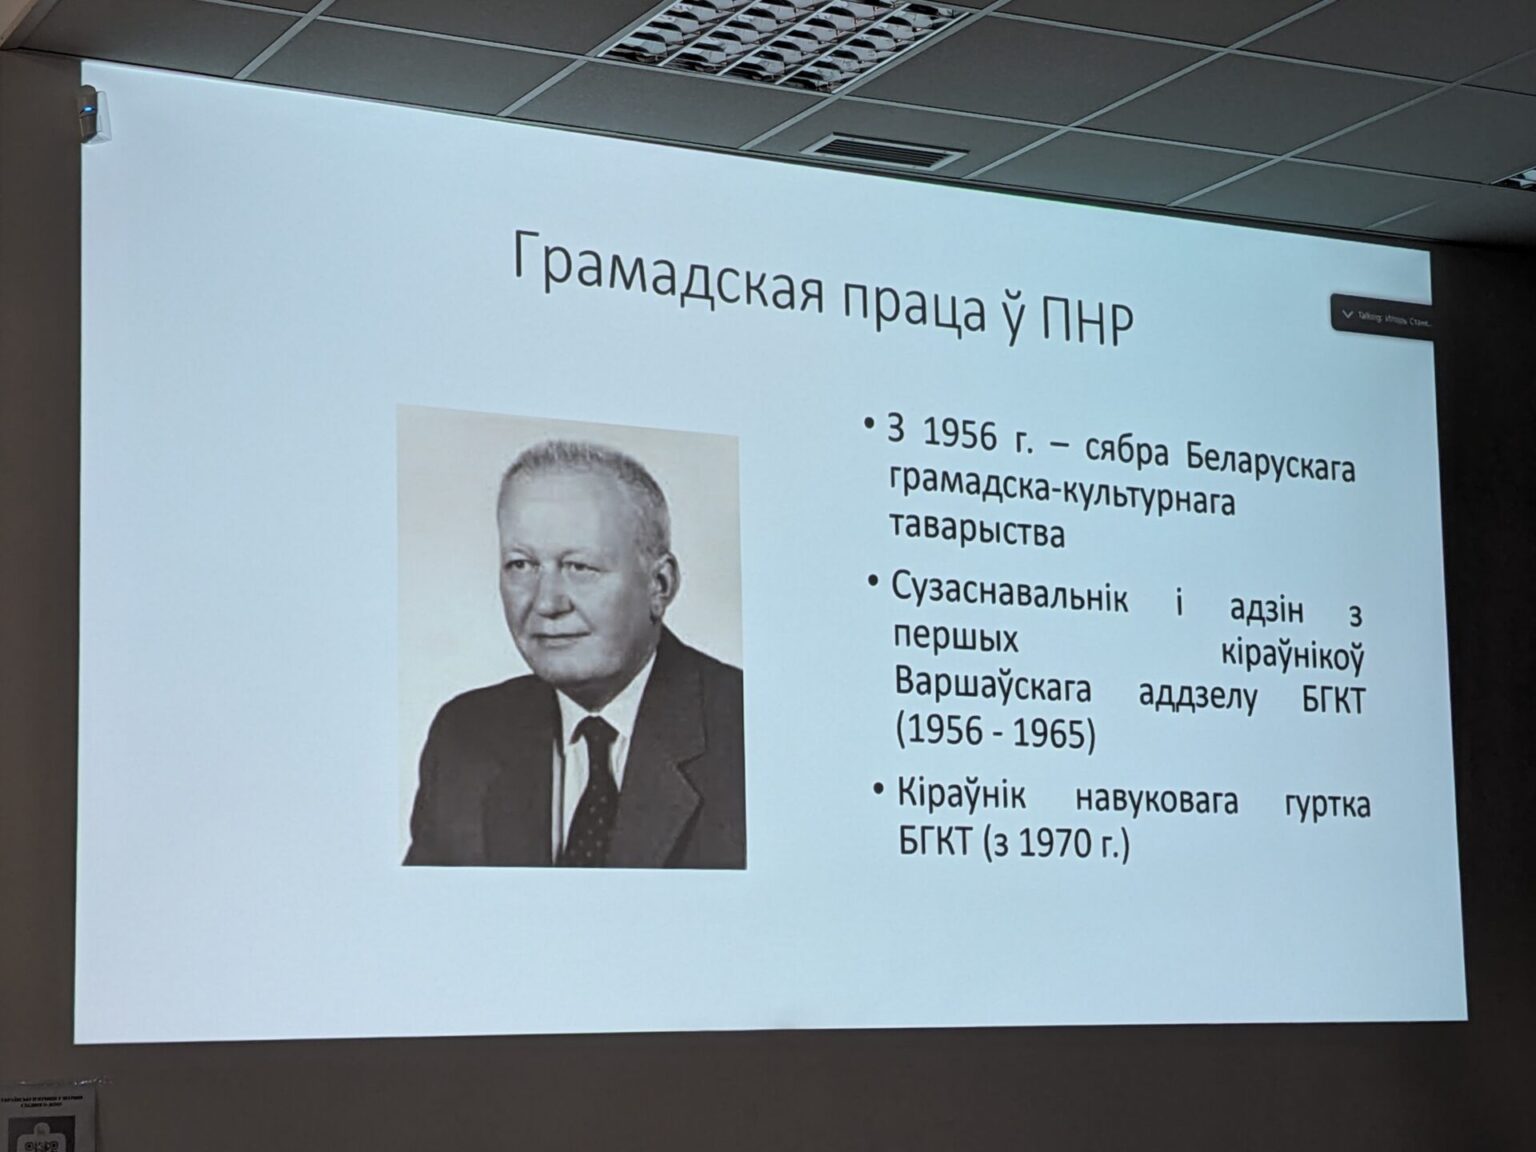 The 95th anniversary of the birth of historian Jerzy Turonek has been celebrated in Warsaw